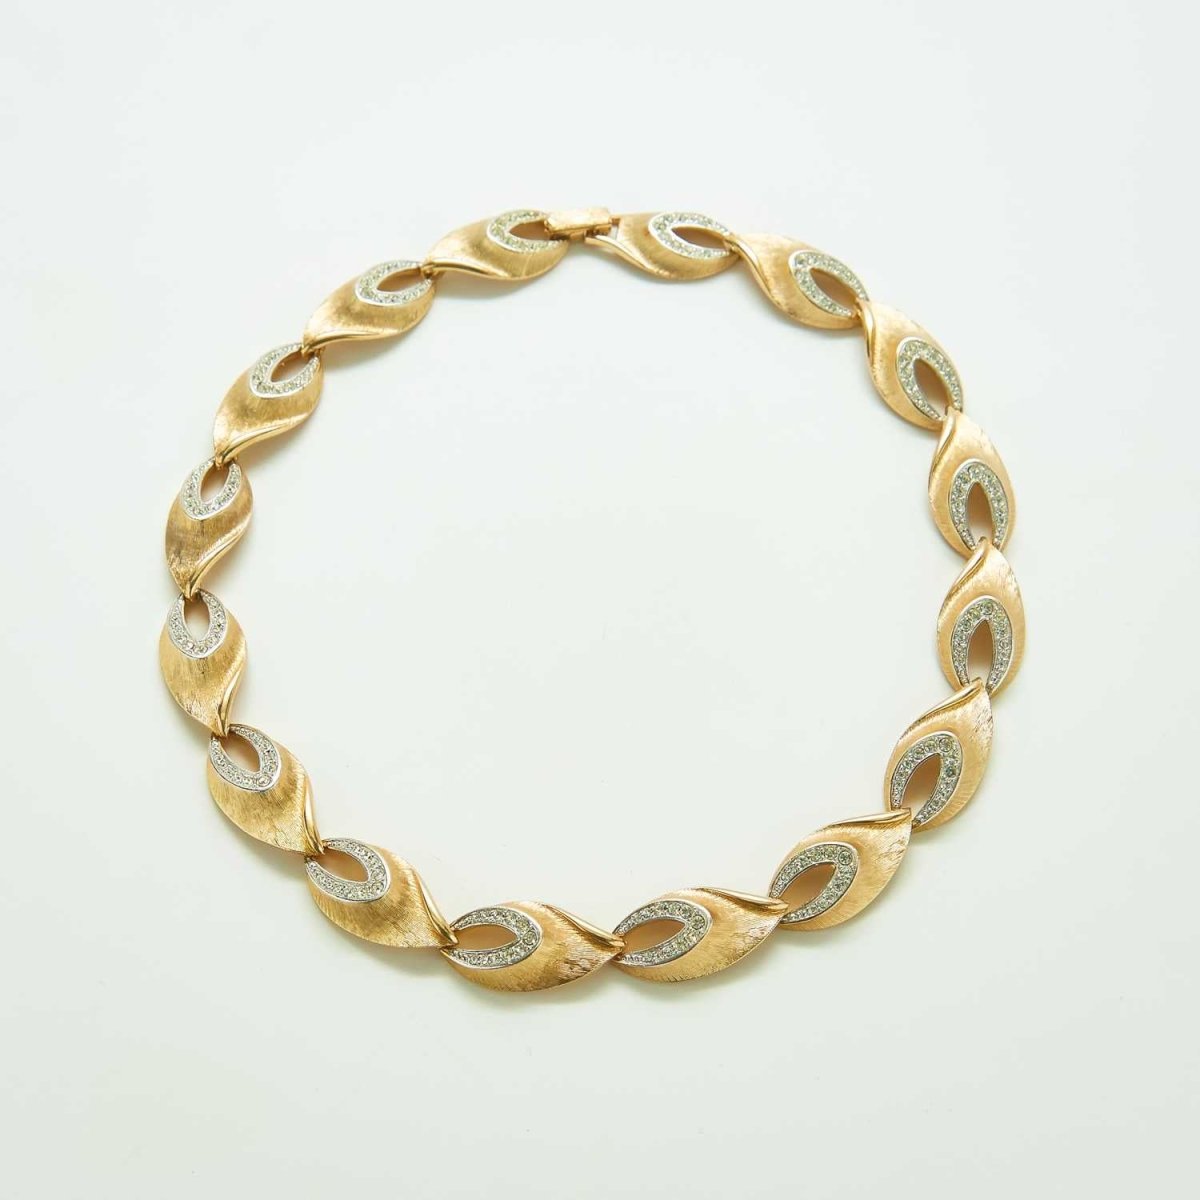 Vintage Pave Link Statement Necklace - Admiral Row